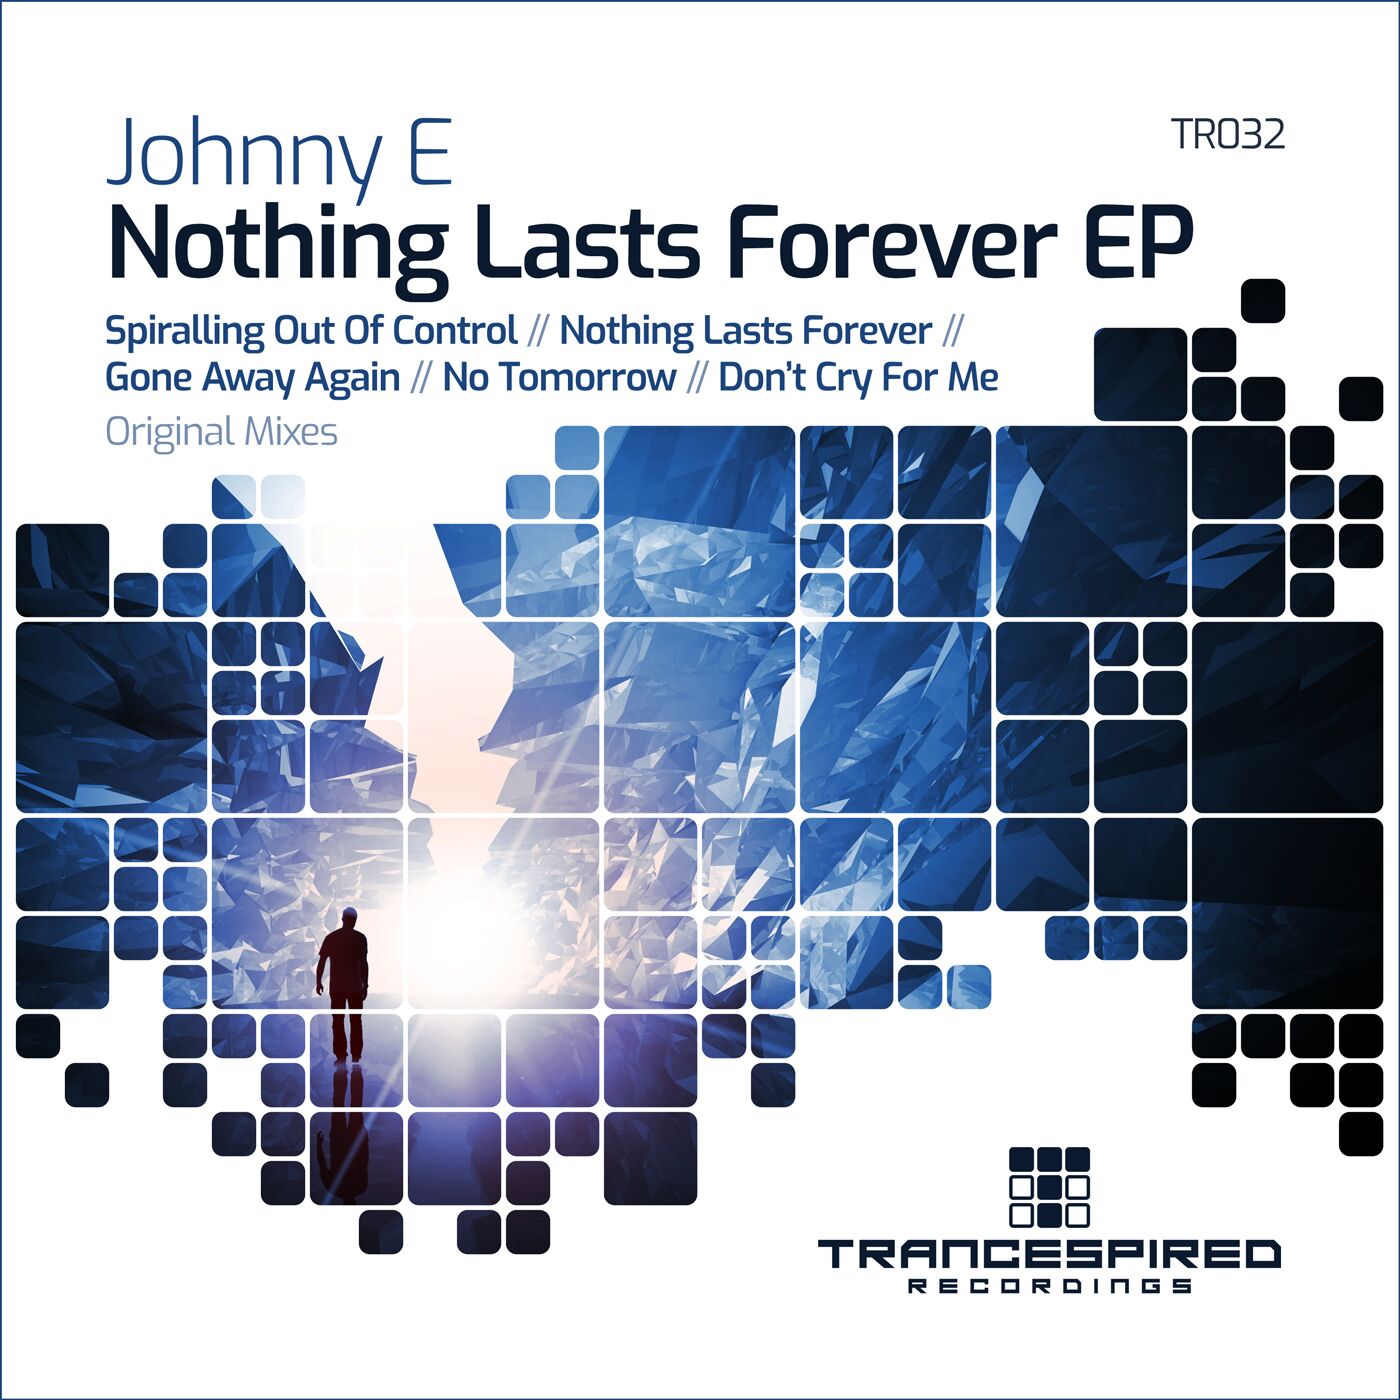 Johnny E presents Nothing Lasts Forever EP on Trancespired Recordings